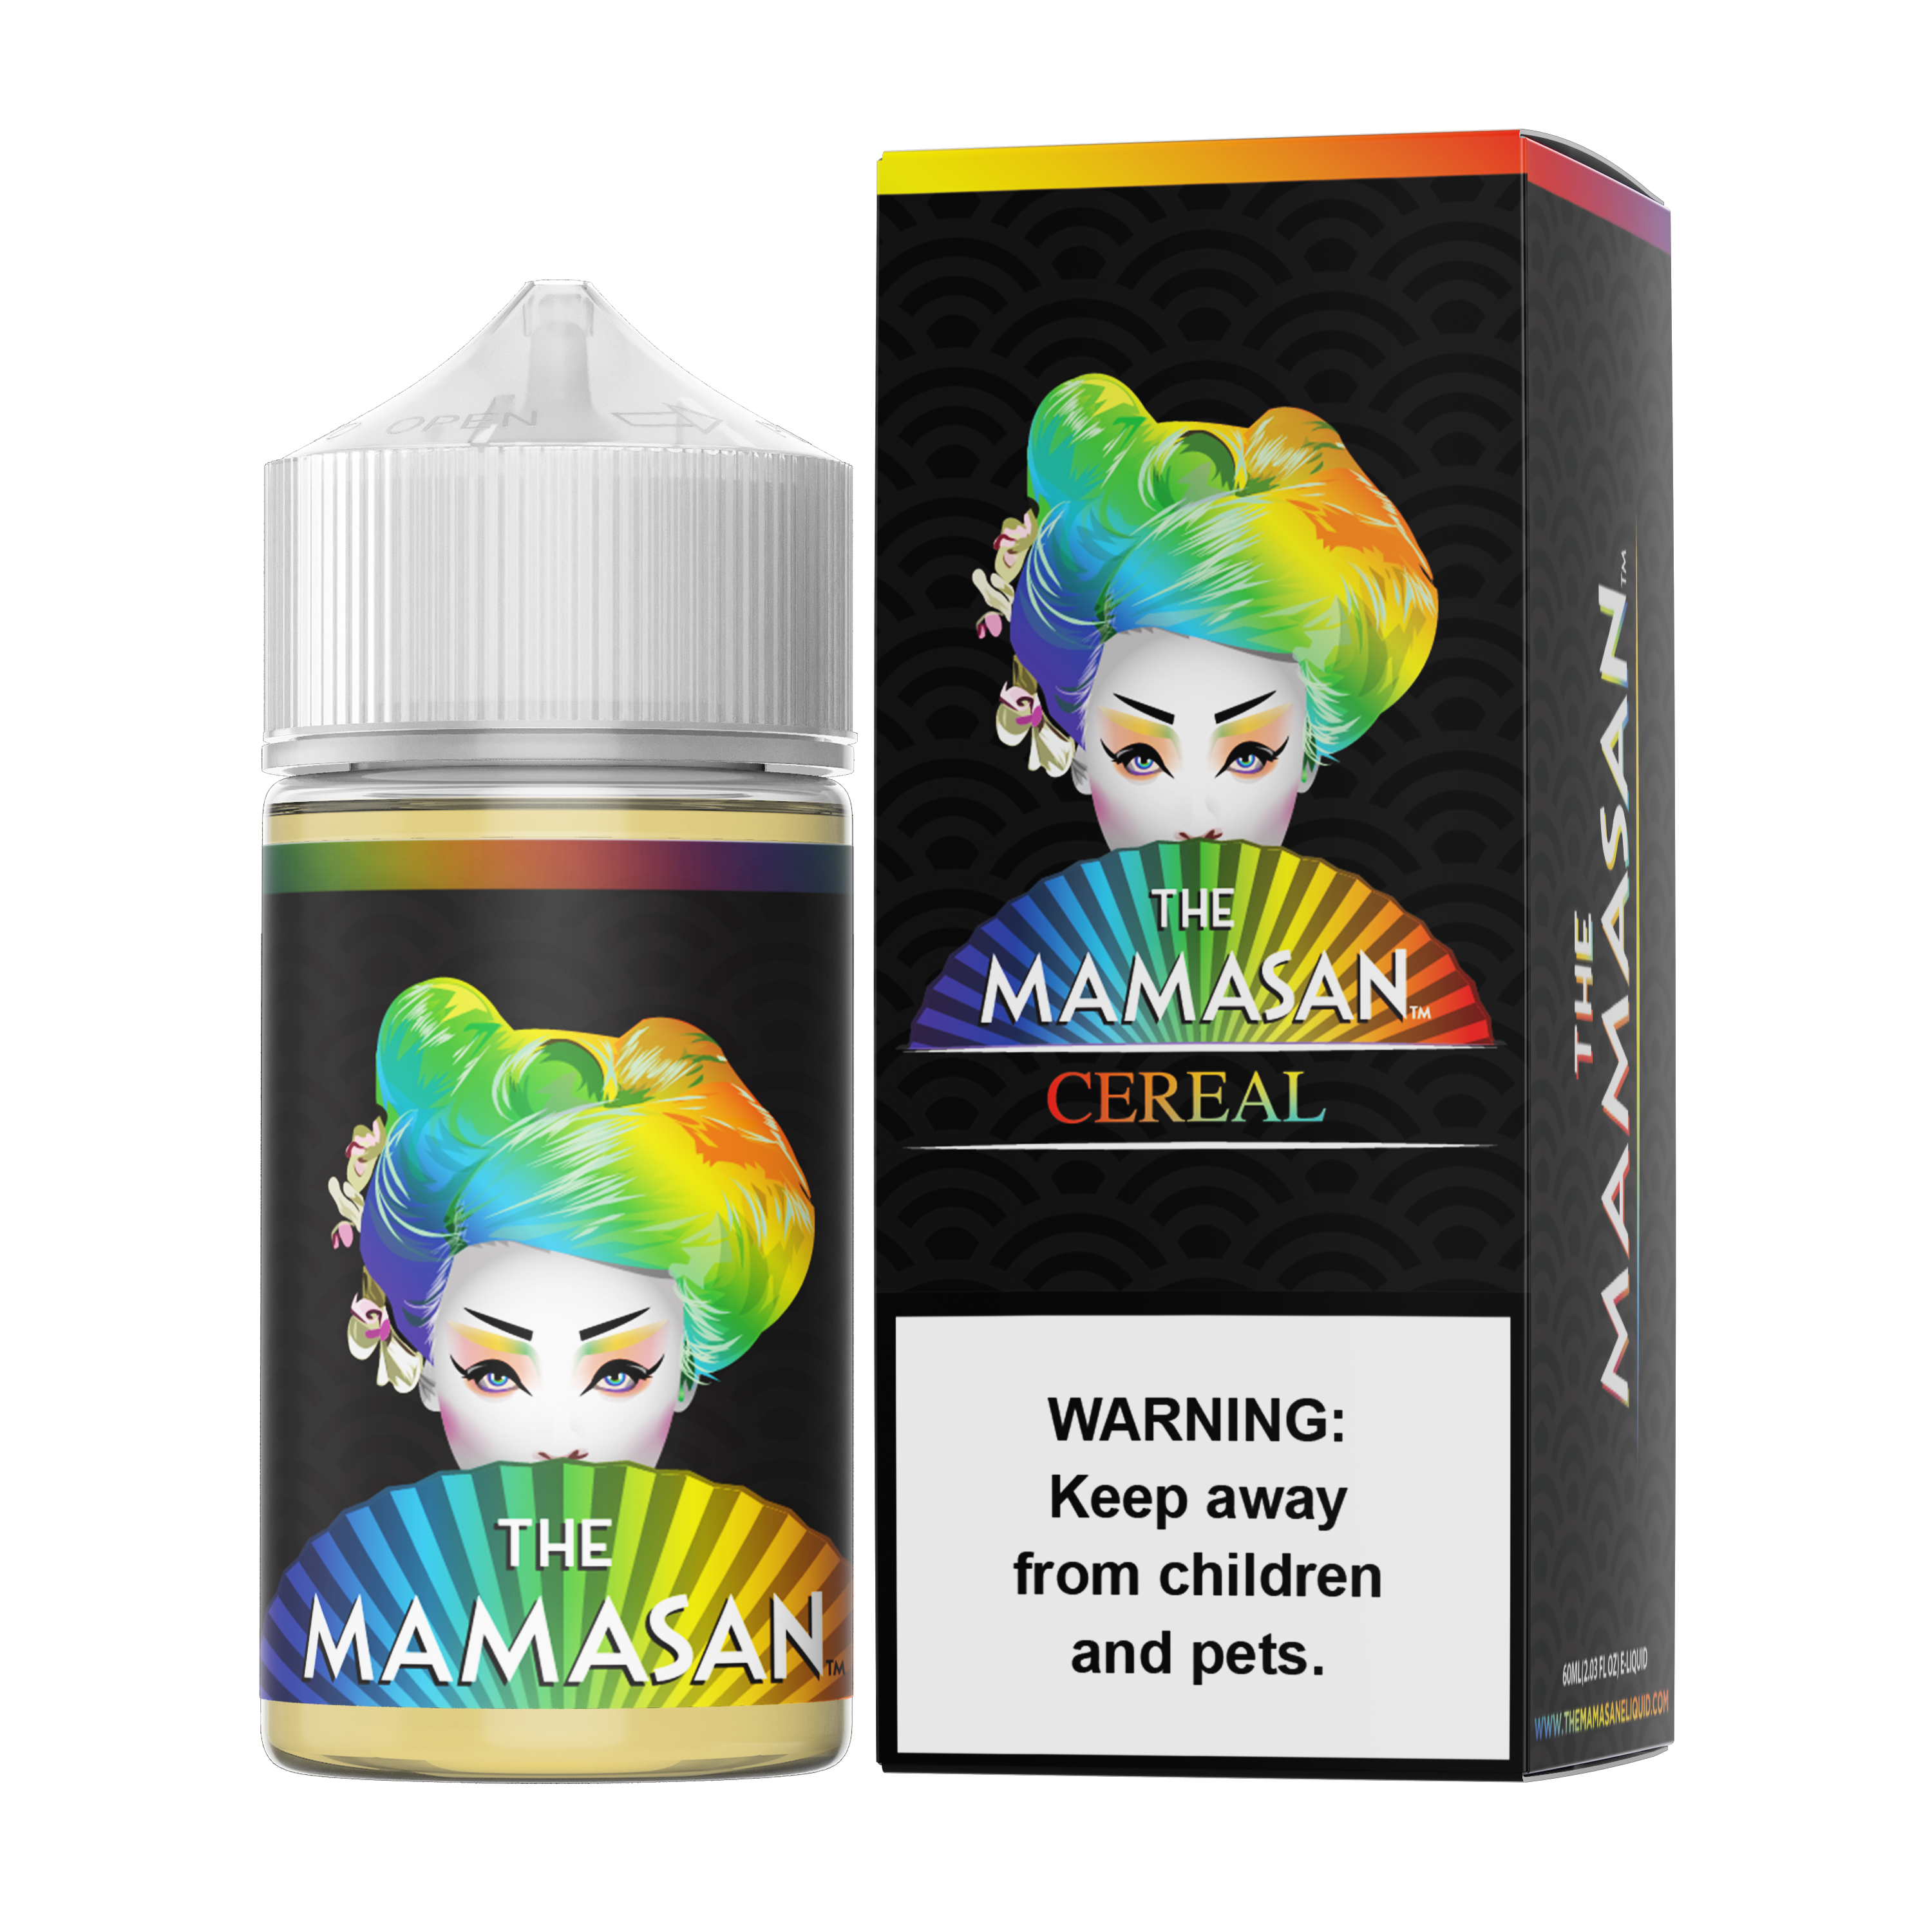 Cereal (Super Cereal) by The Mamasan Series 60mL with Packaging